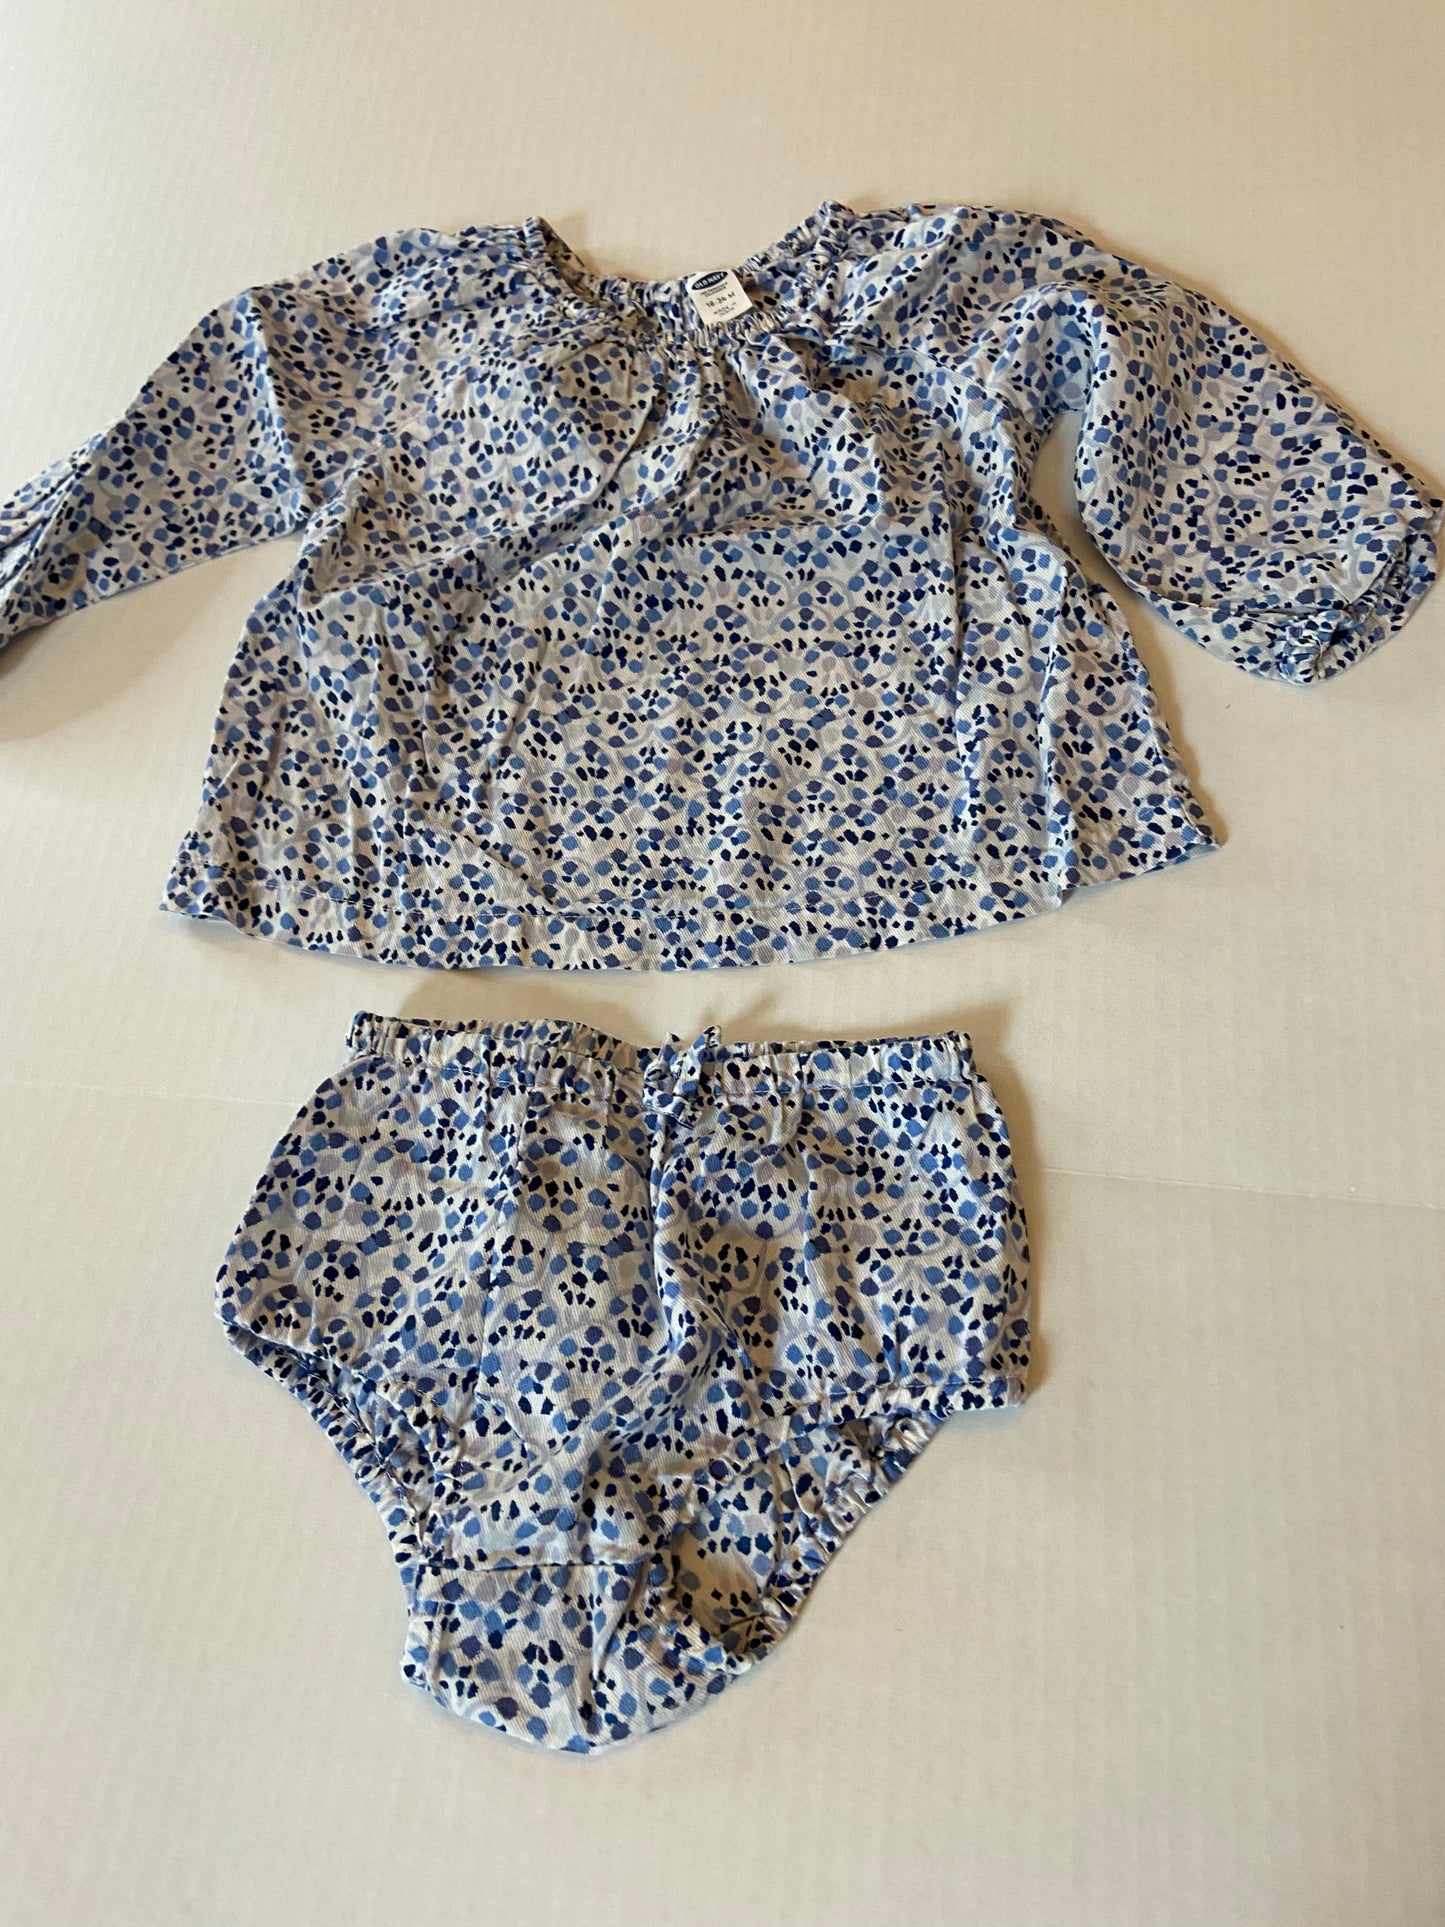 Girls 18-24 mos Old Navy top and bloomers